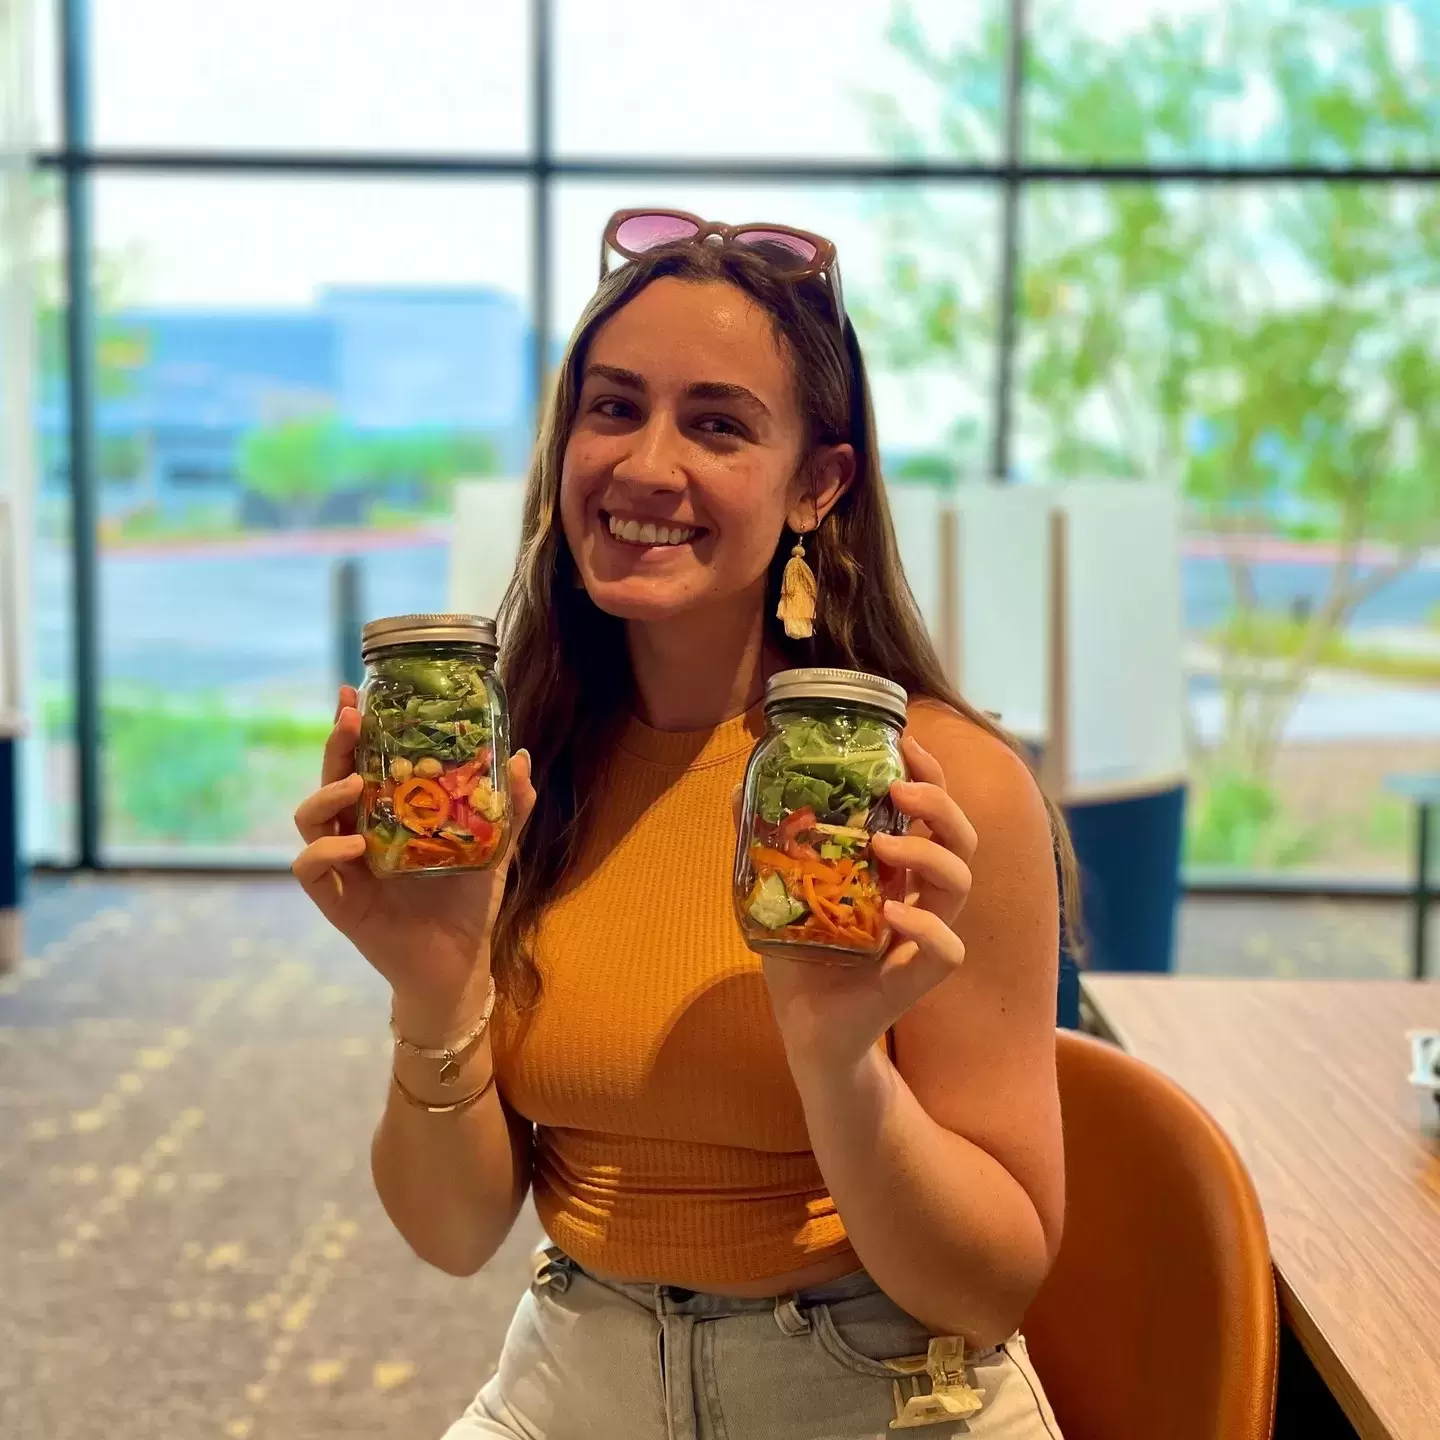 Shoutout to our Liv Head Wellness Coach, Ben for teaching us easy and healthy meal prep techniques! 

We had a wonderful time creating our own salad in a jar! 🥗
.
.
.
#LivWell #LivConnected #LivLikeNoOther #Mealprep